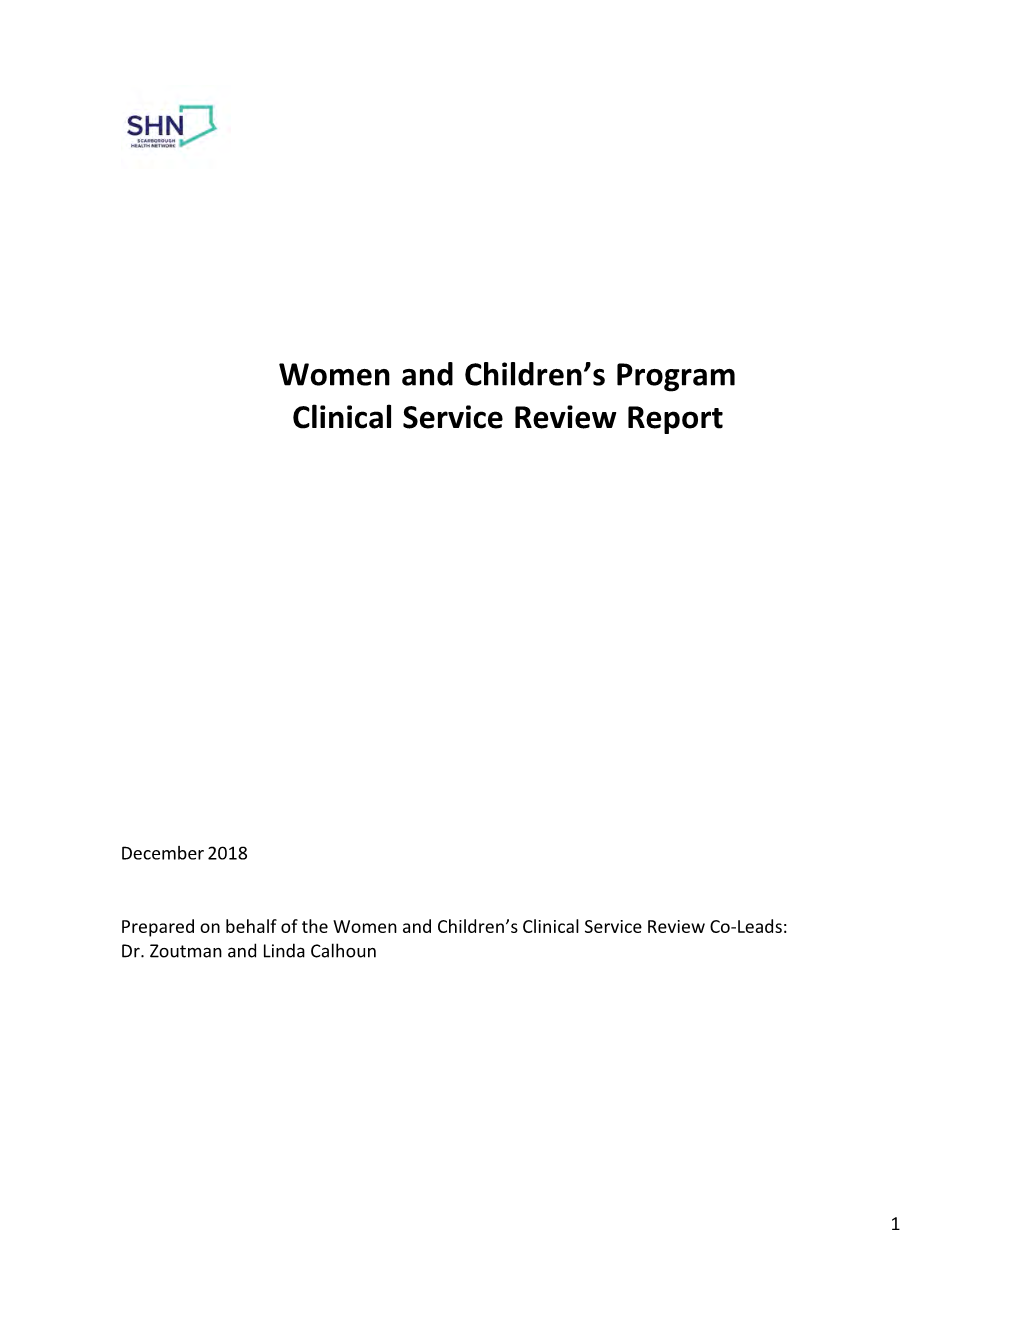 Women and Children's Program Clinical Service Review Report